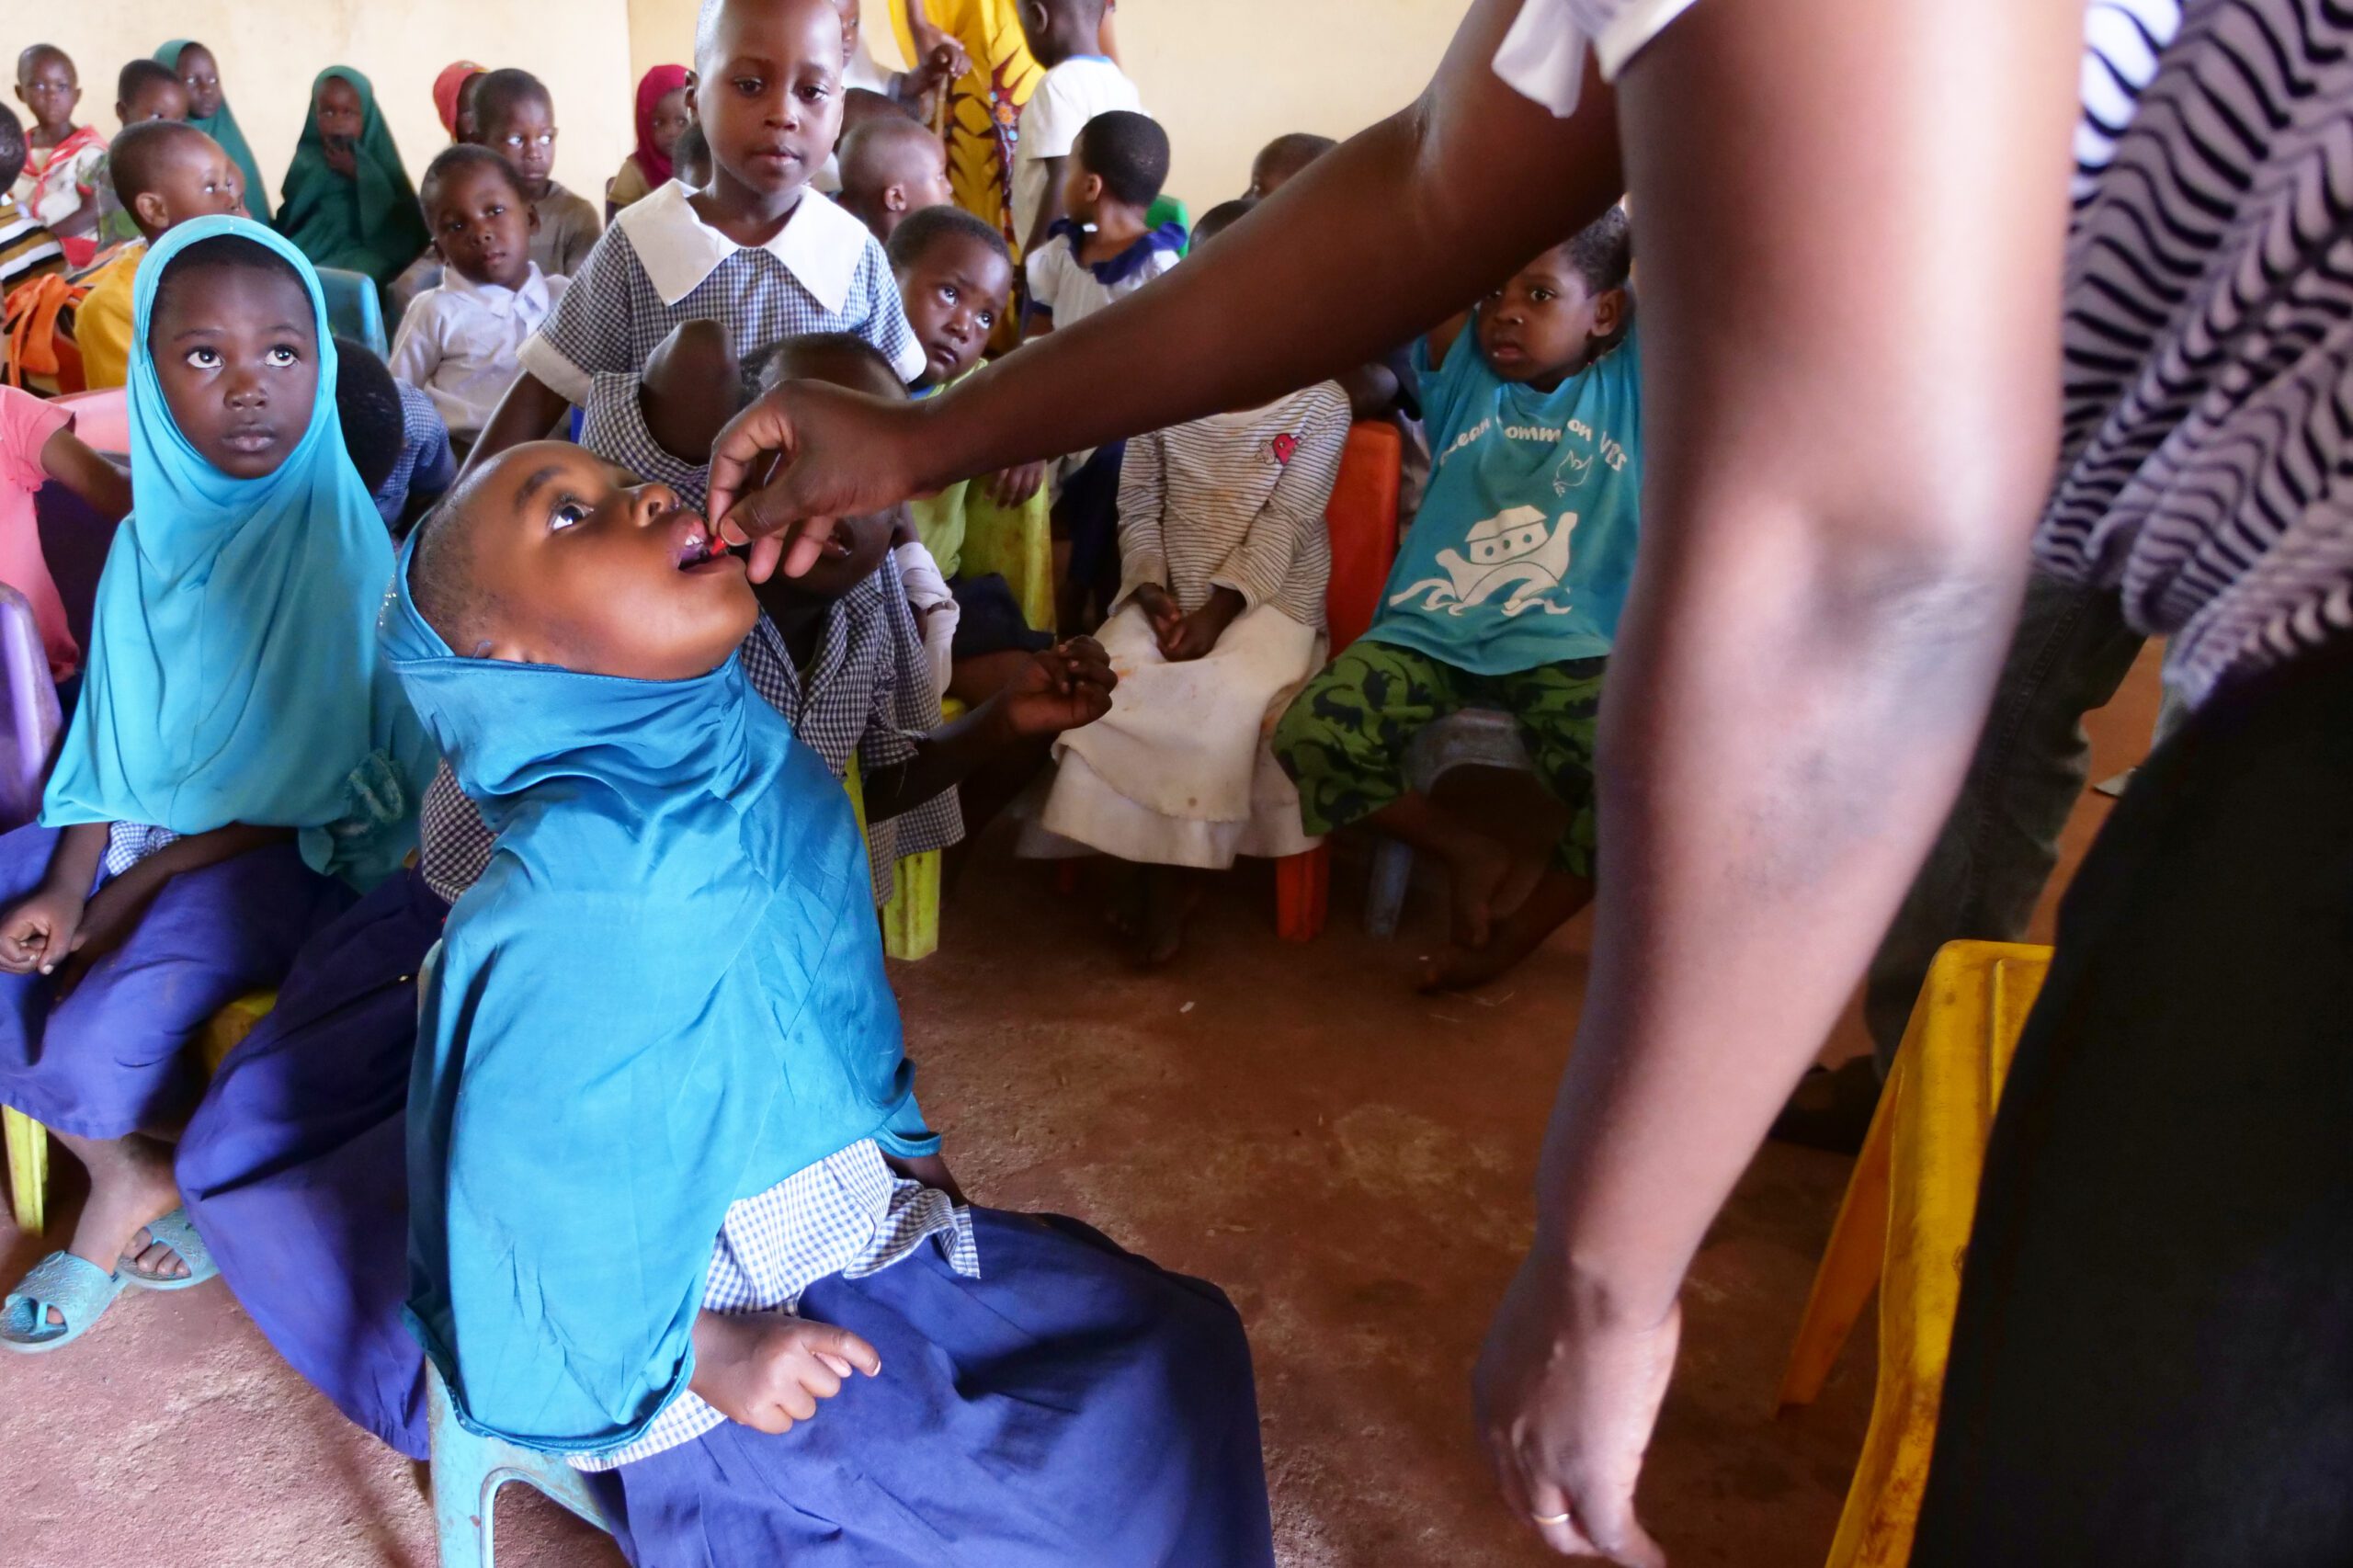 A girl at Funzi Island Primary School receives a dose of vitamin A supplementation as her classmates look on